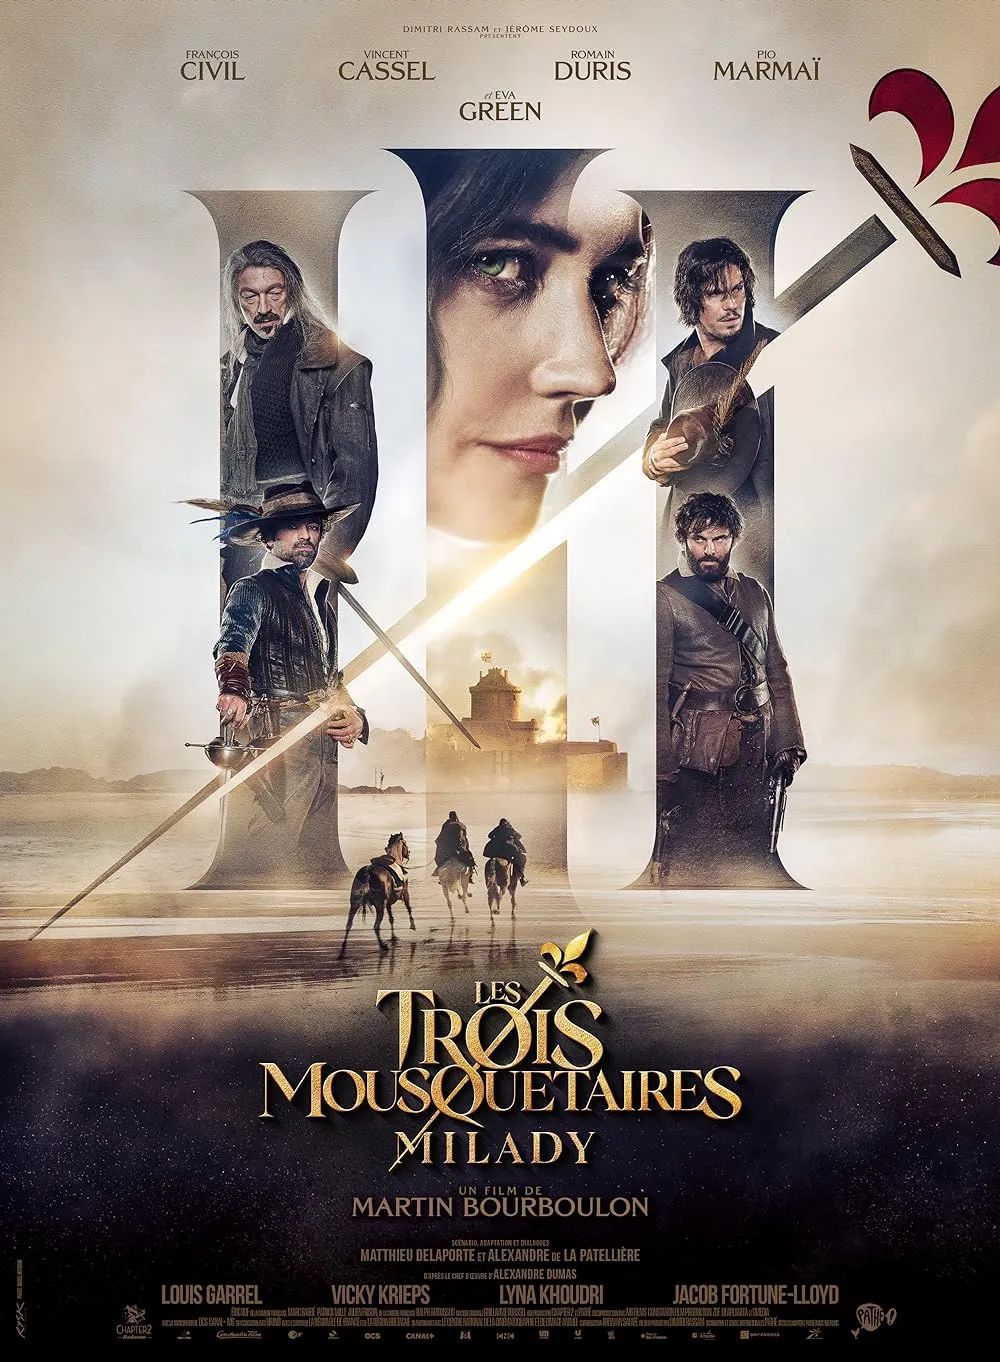 The Three Musketeers Part II Milady 2023 HQ Hindi 480p HDCAMRip 400MB Download